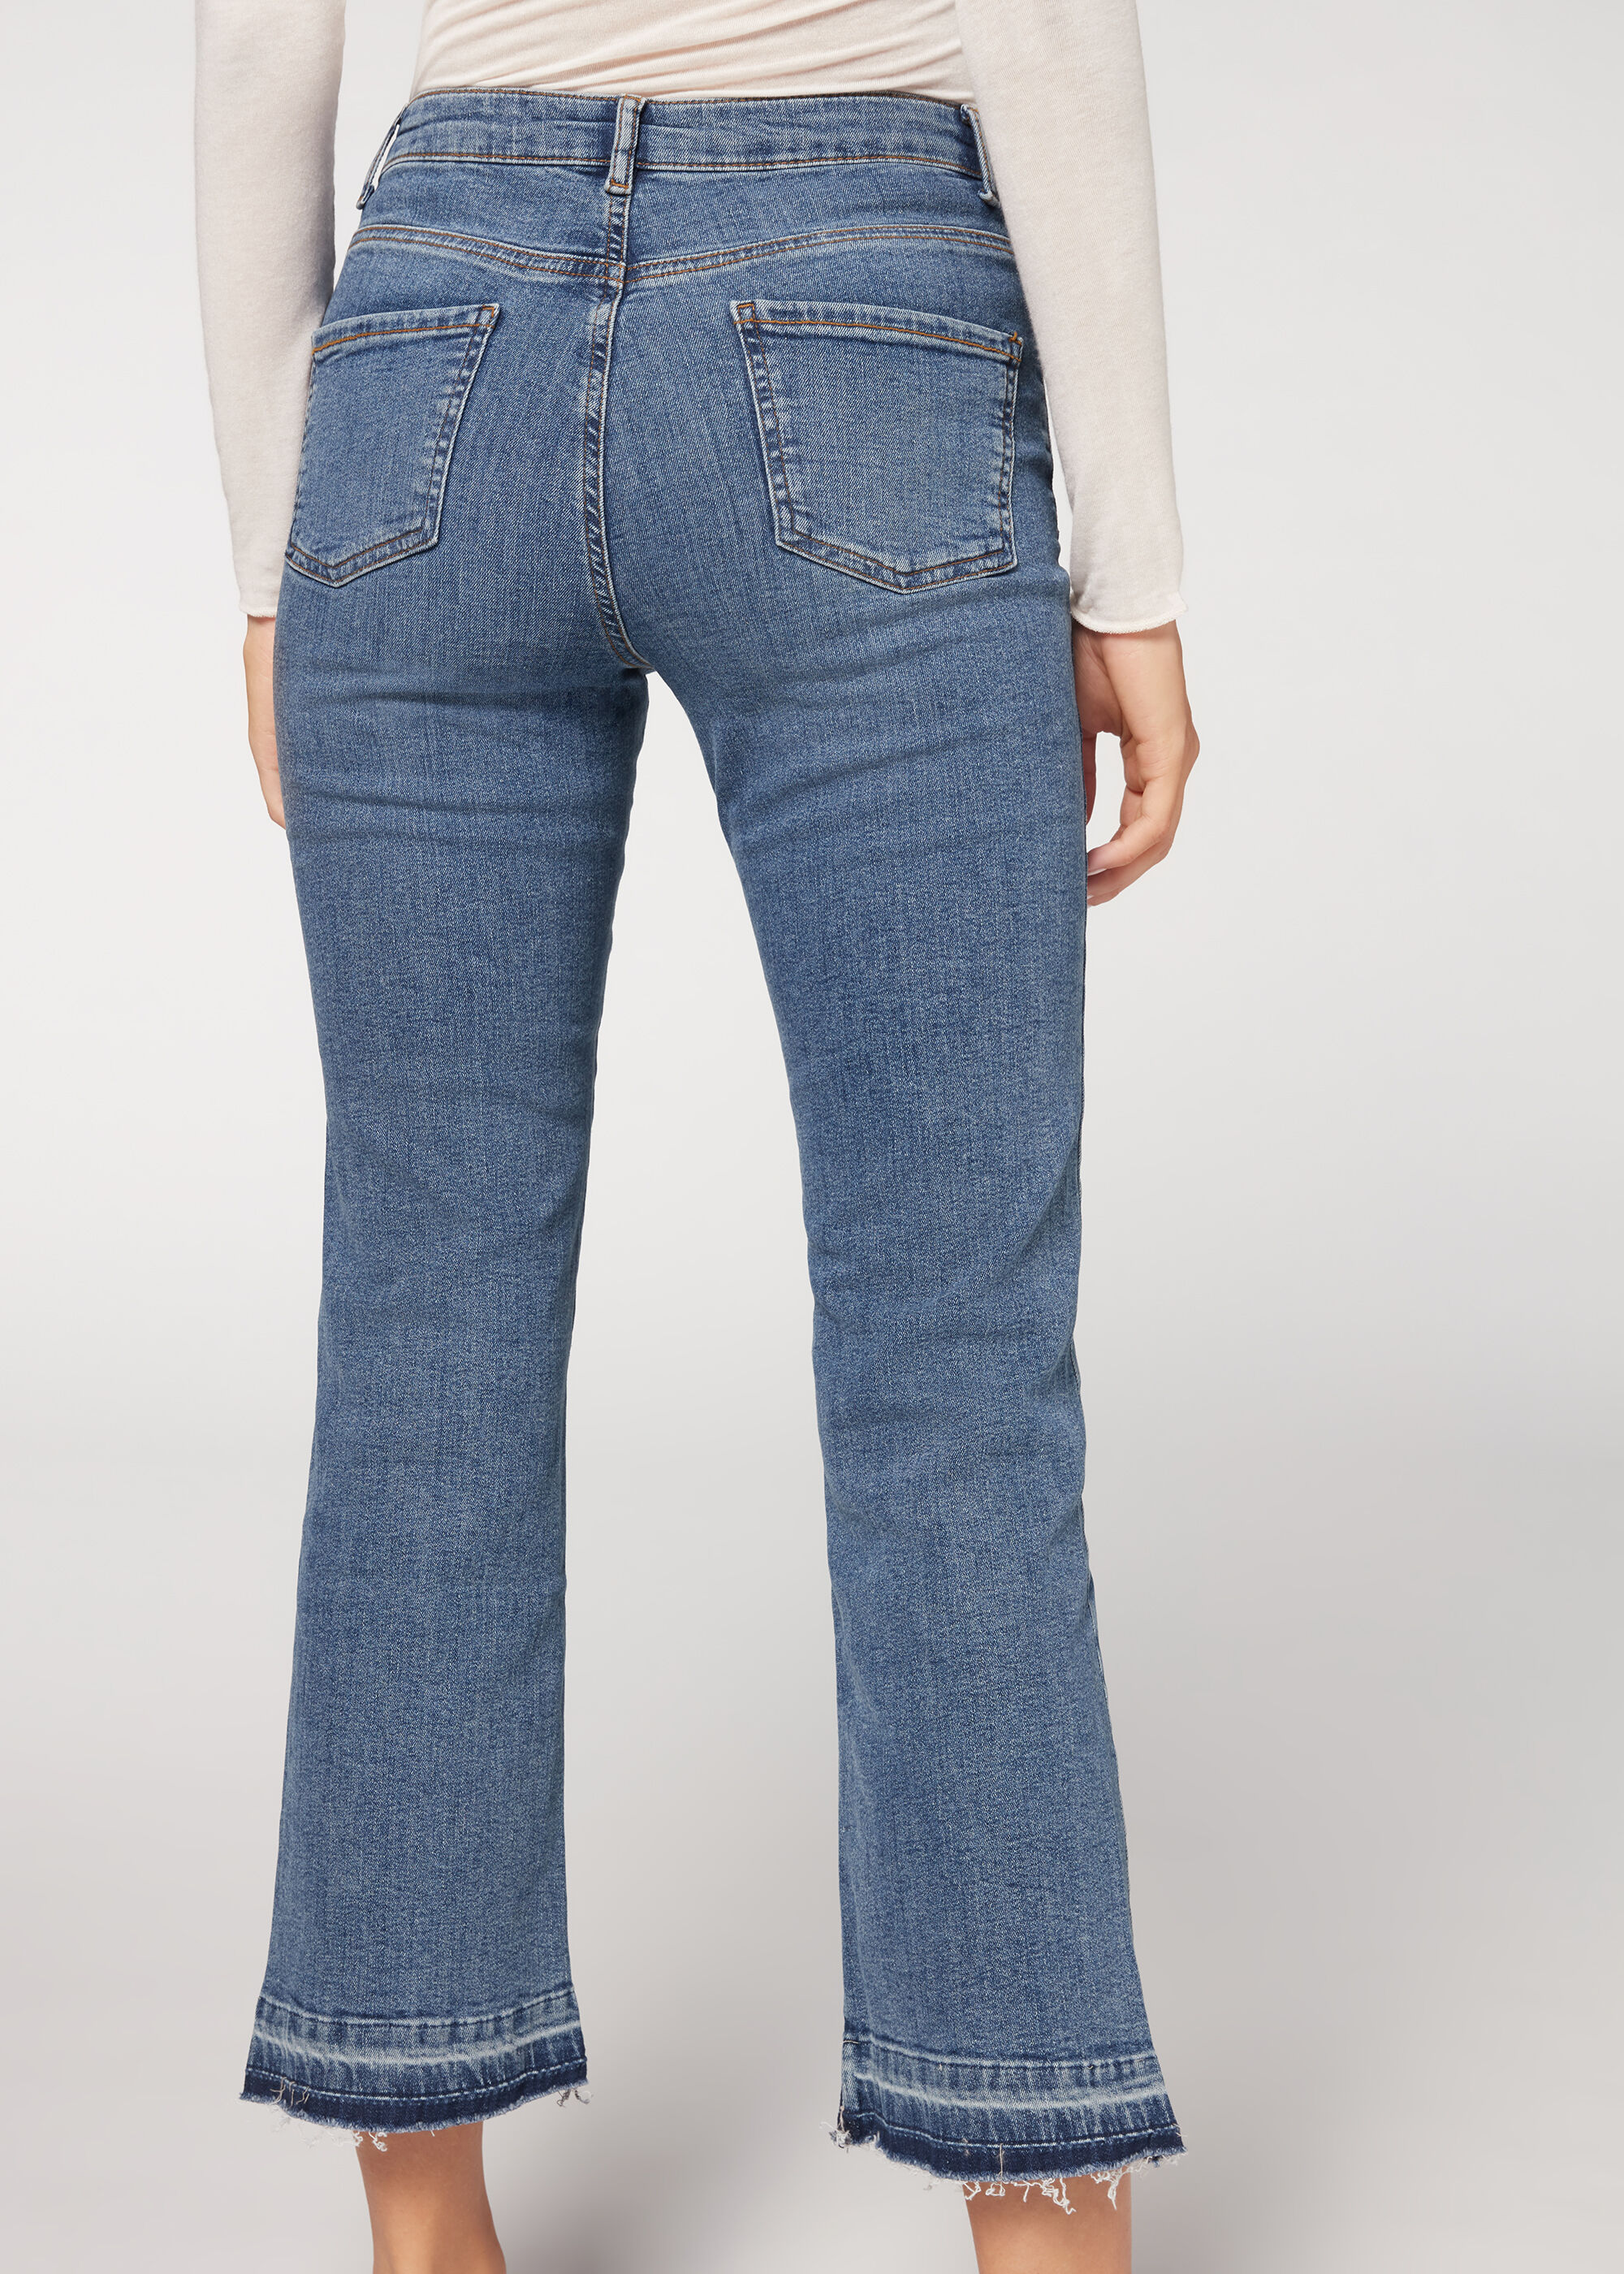 Cropped Flare Jeans - Calzedonia